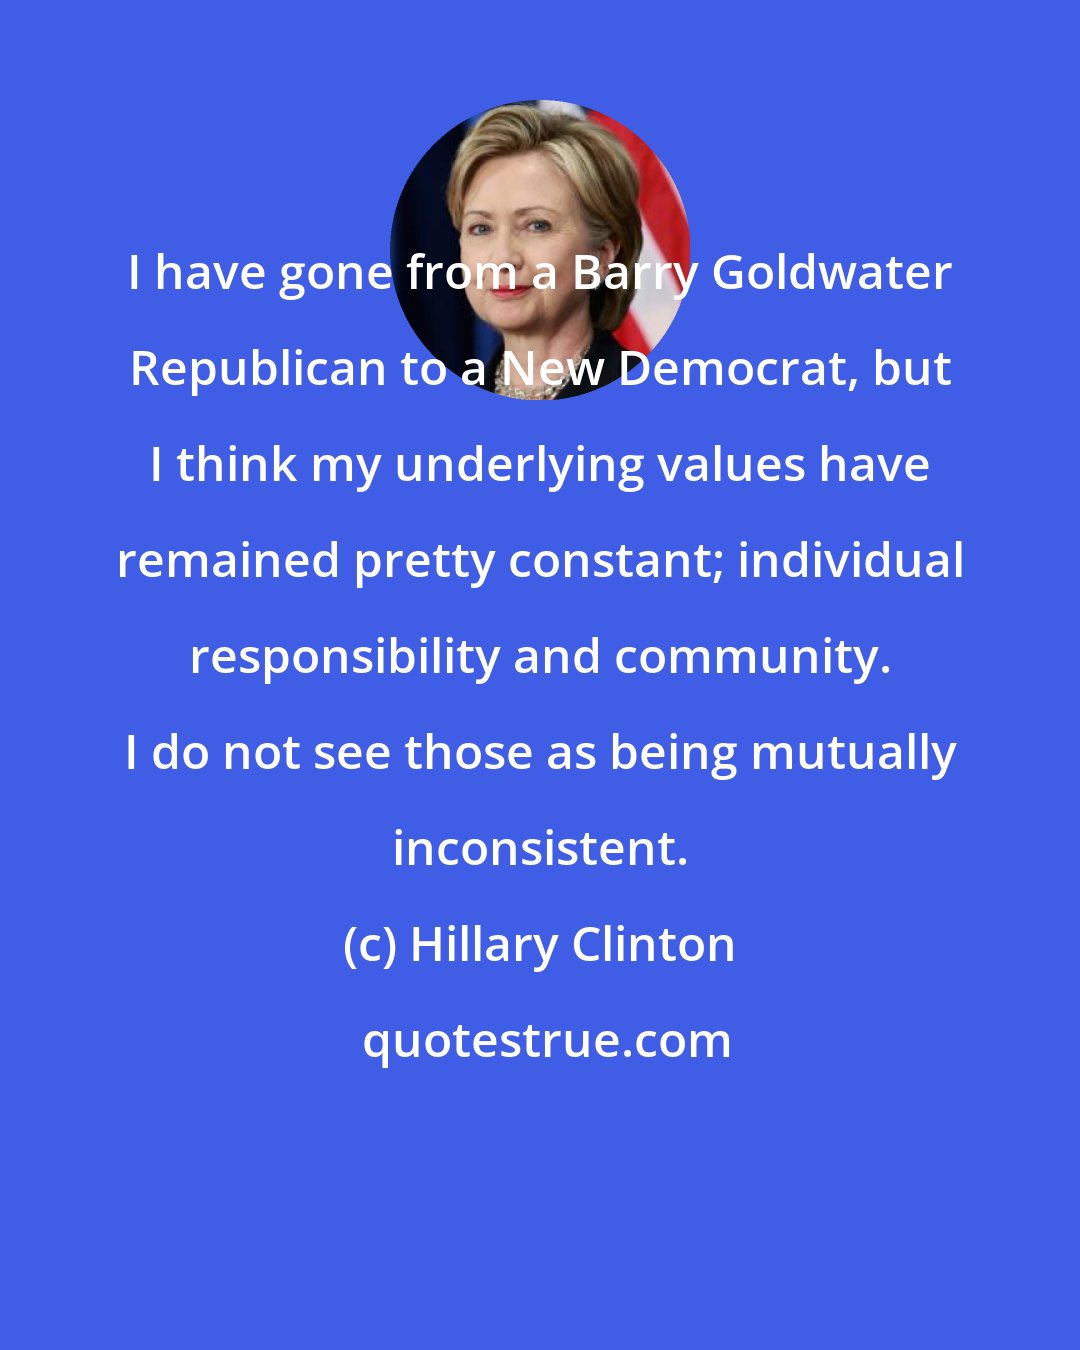 Hillary Clinton: I have gone from a Barry Goldwater Republican to a New Democrat, but I think my underlying values have remained pretty constant; individual responsibility and community. I do not see those as being mutually inconsistent.